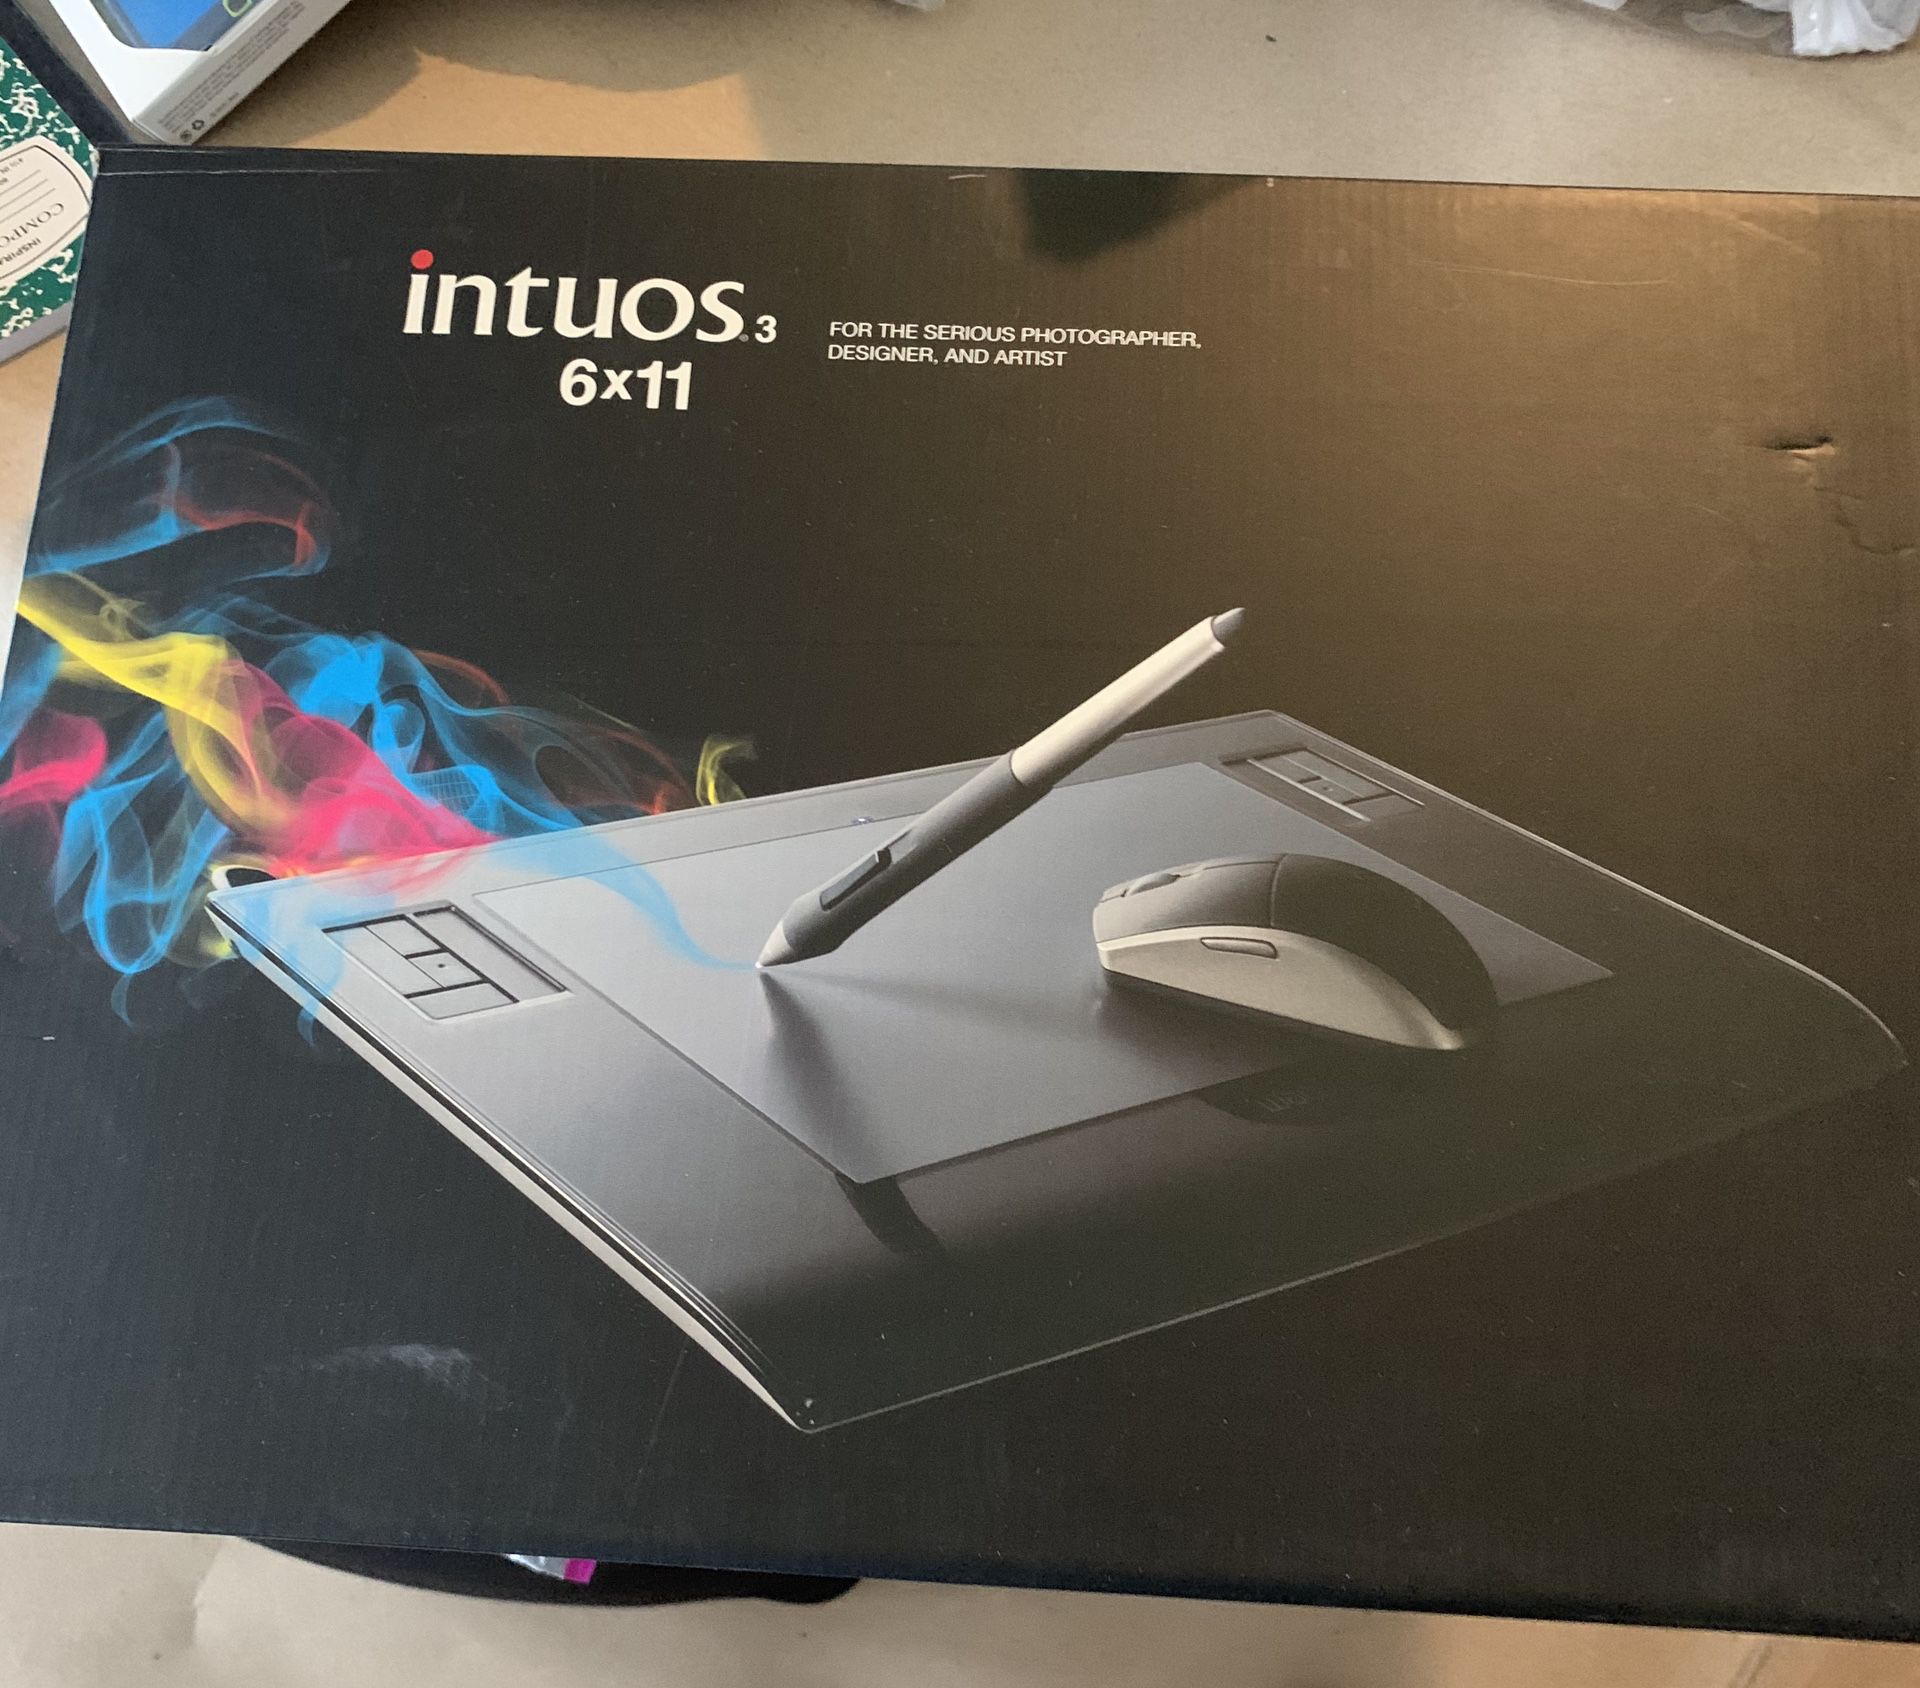 Intuos 3 6 x 11 graphics drawing pad. Brand New in box sells for 130 new